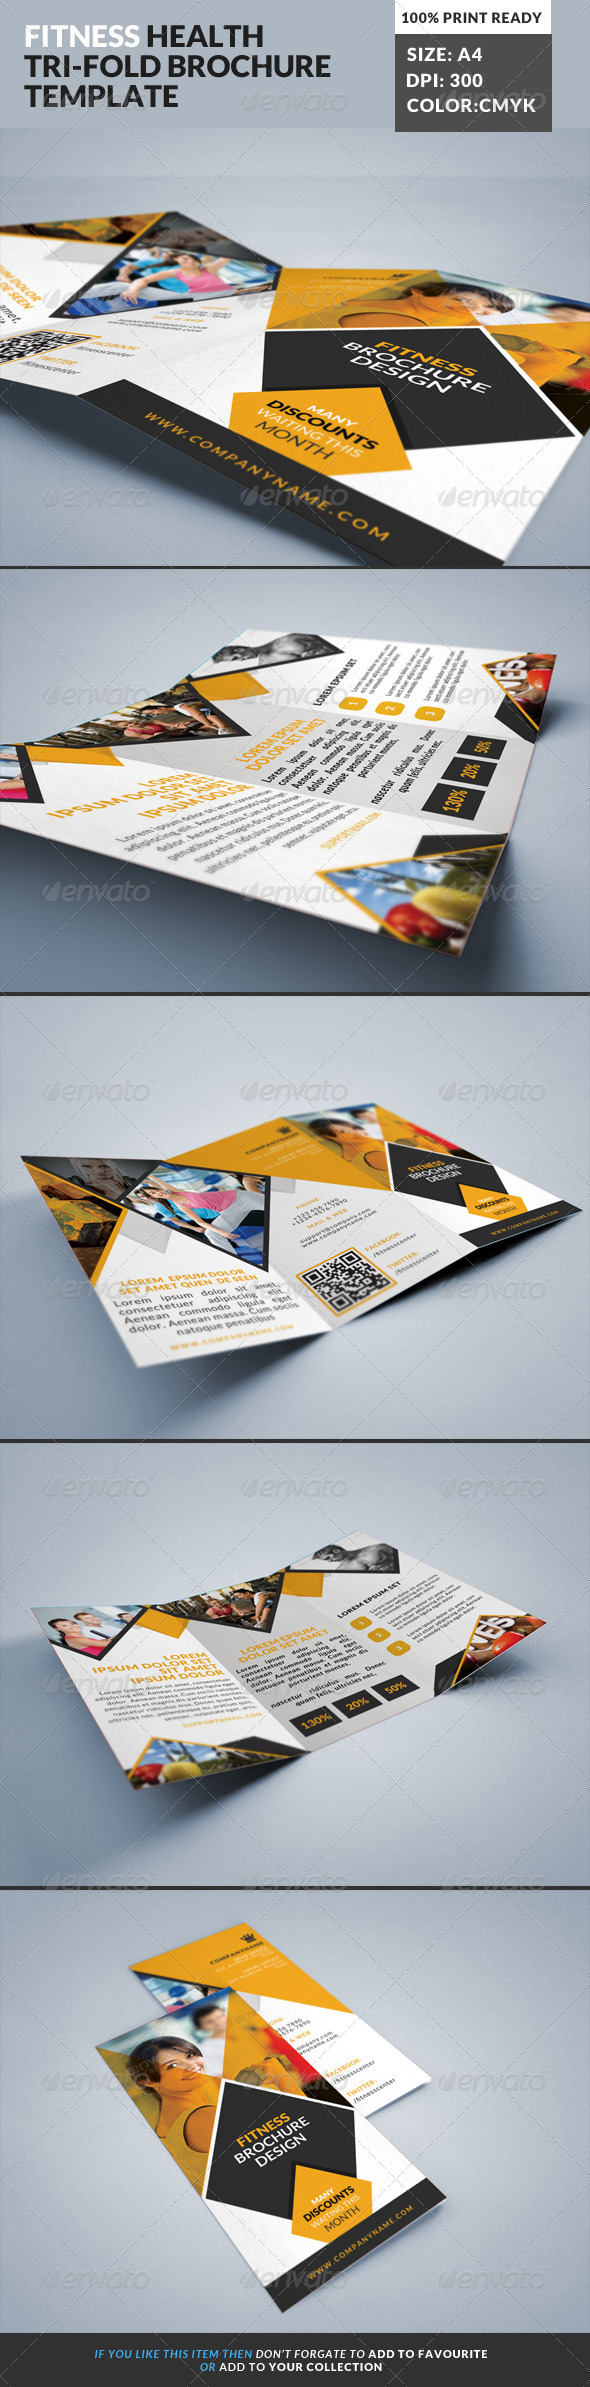 Fitness Gym Tri-Fold Brochures Template 2